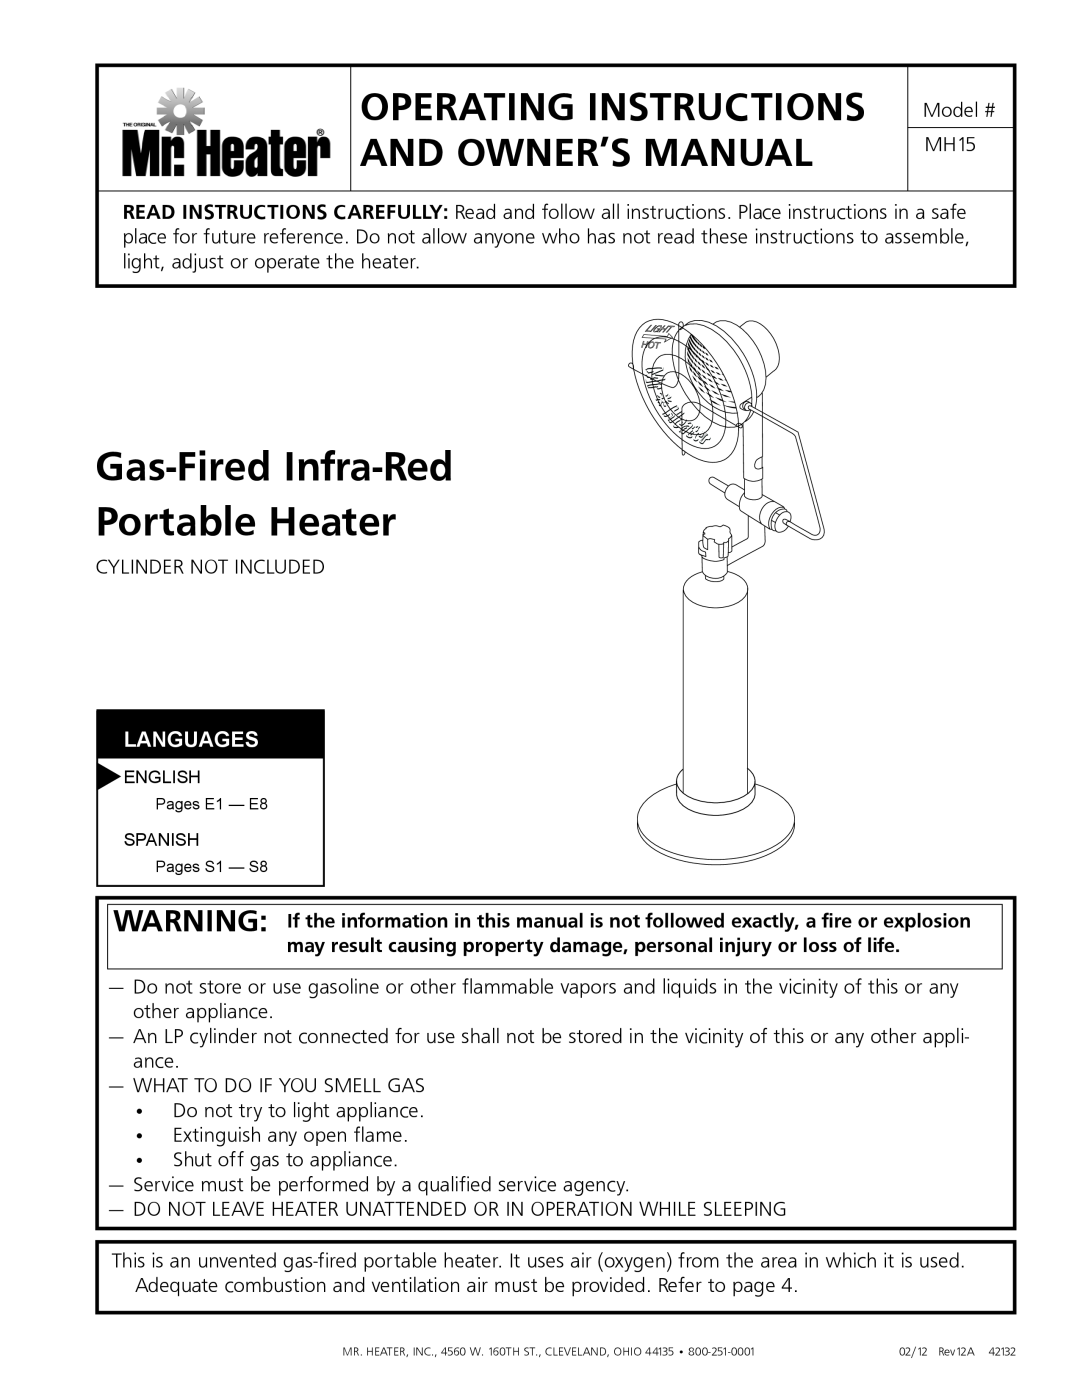 Mr. Heater MH15 operating instructions Languages, Gas-Fired Infra-Red Portable Heater 